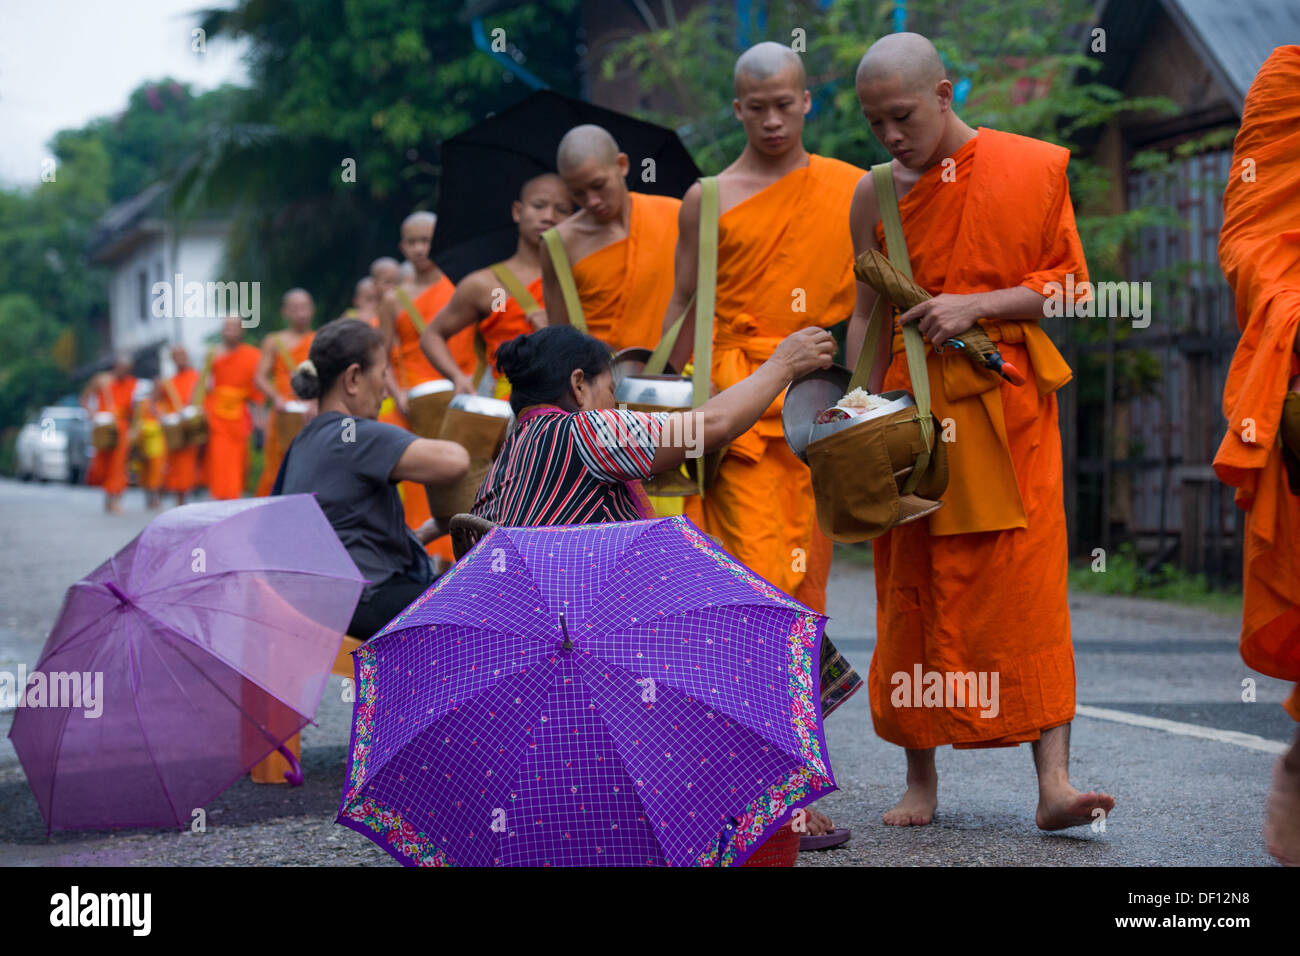 Buddhist monks receiving donations on their morning alms round, Luang Prabang, Laos Stock Photo